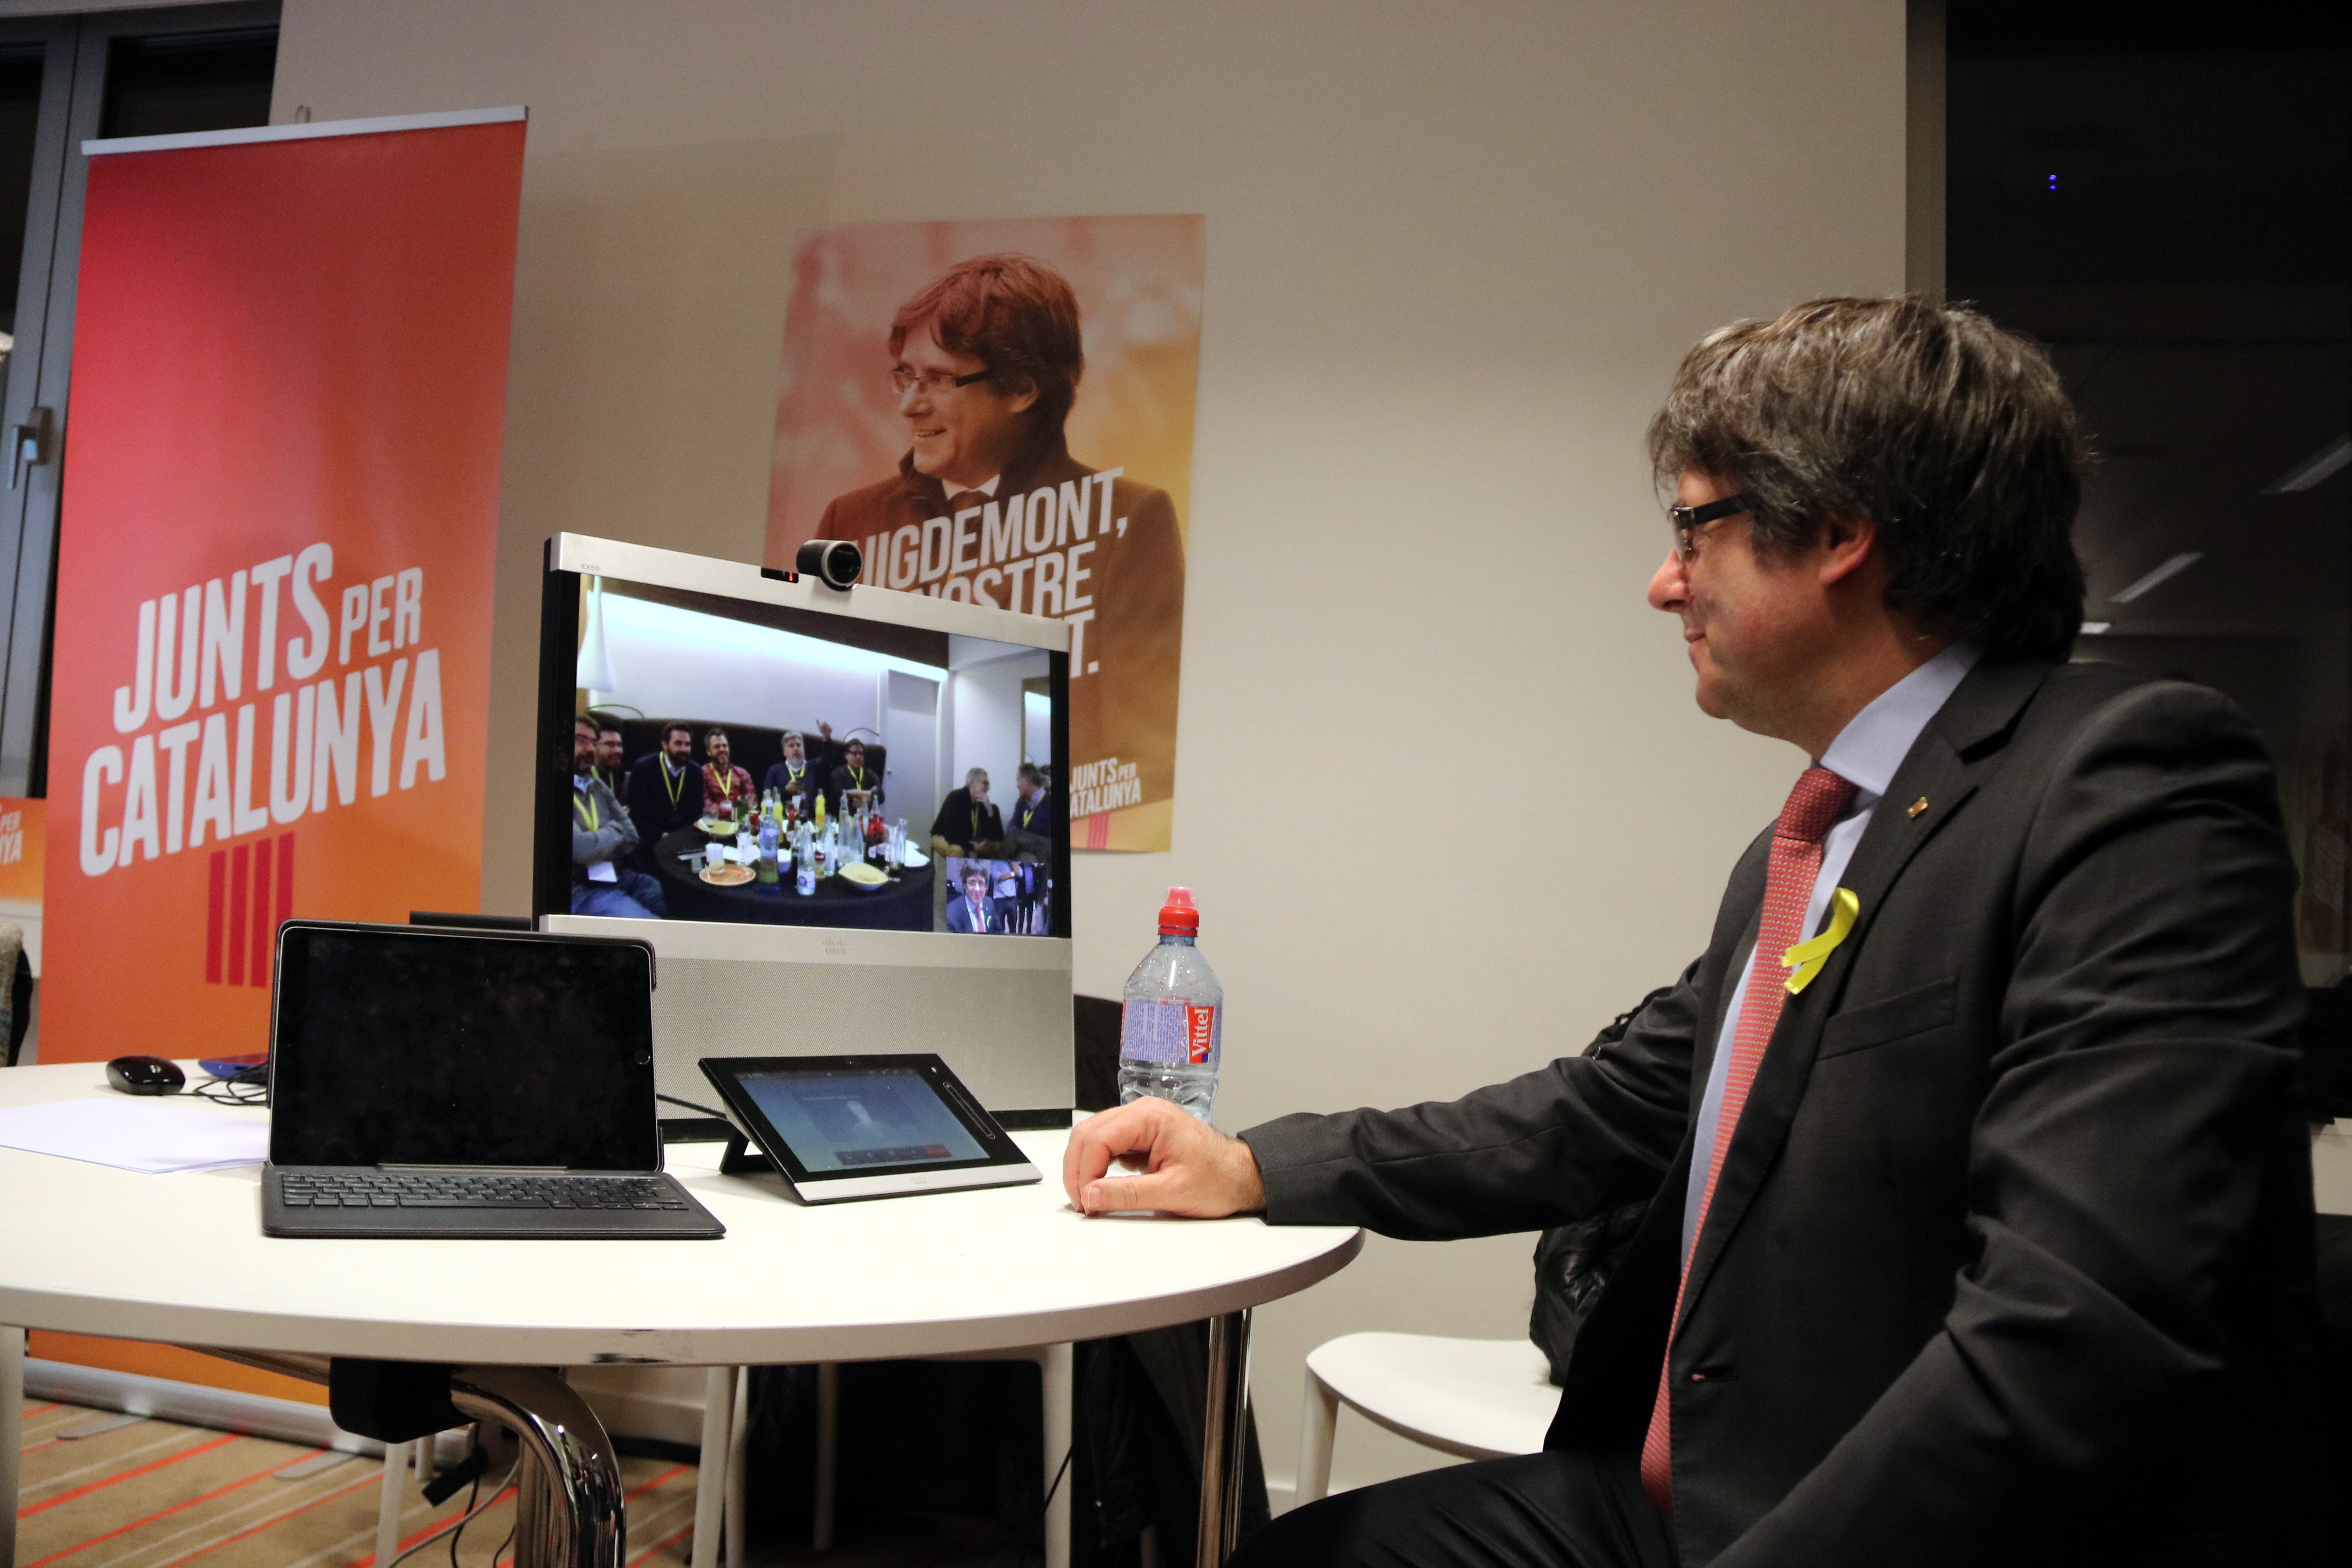 Deposed Catalan president Carles Puigdemont following the count from Brussels (by José Soler)